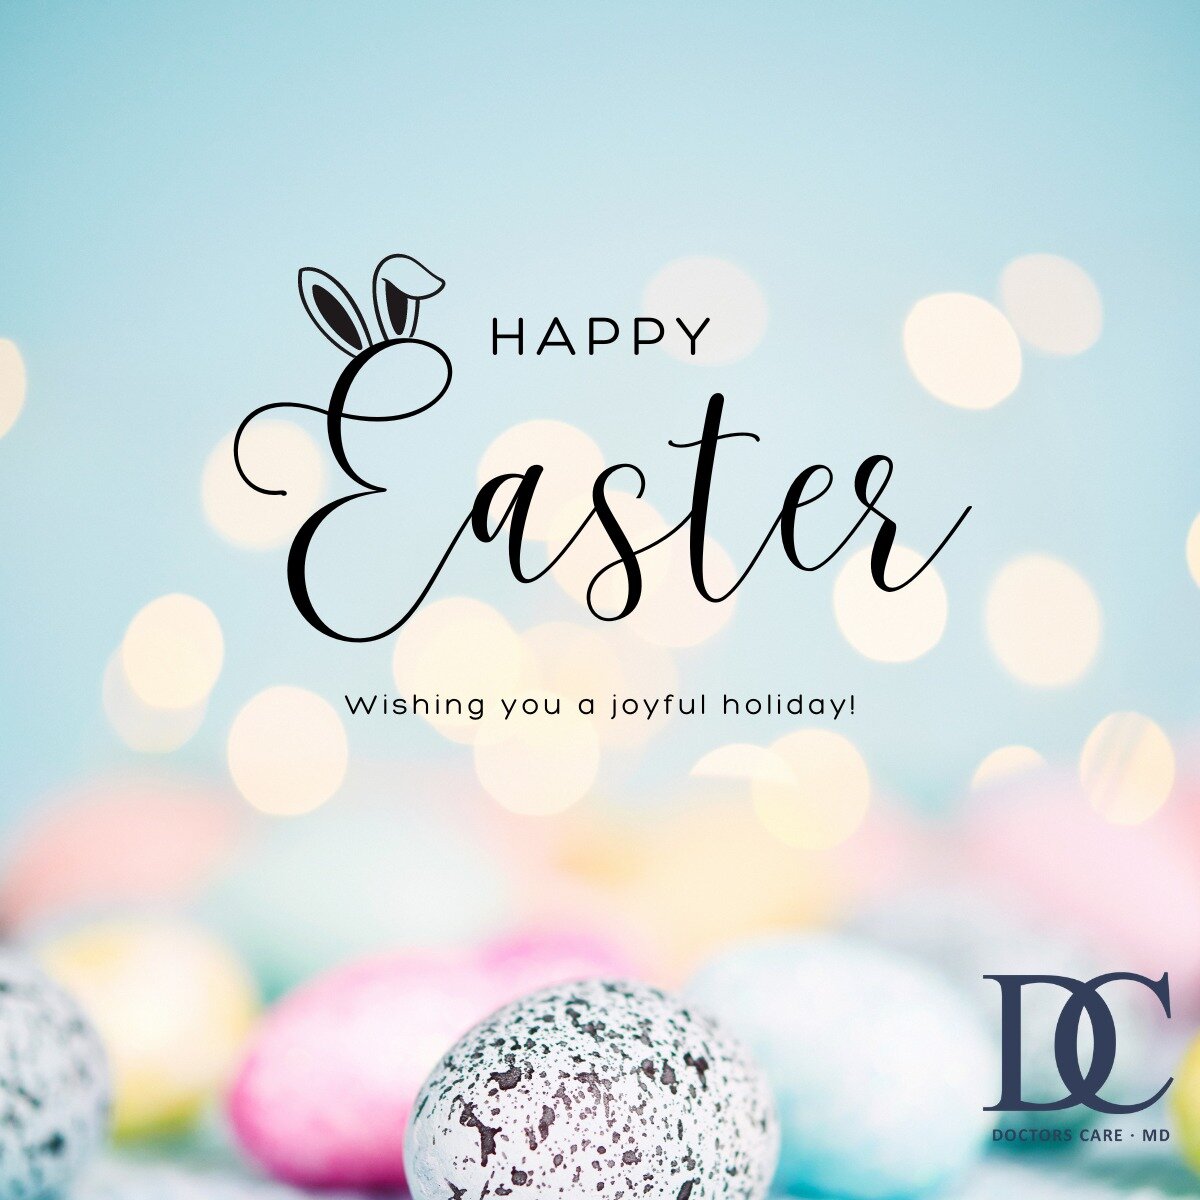 Happy Easter! 🐰🐣🐇
We hope that you have a wonderful day.